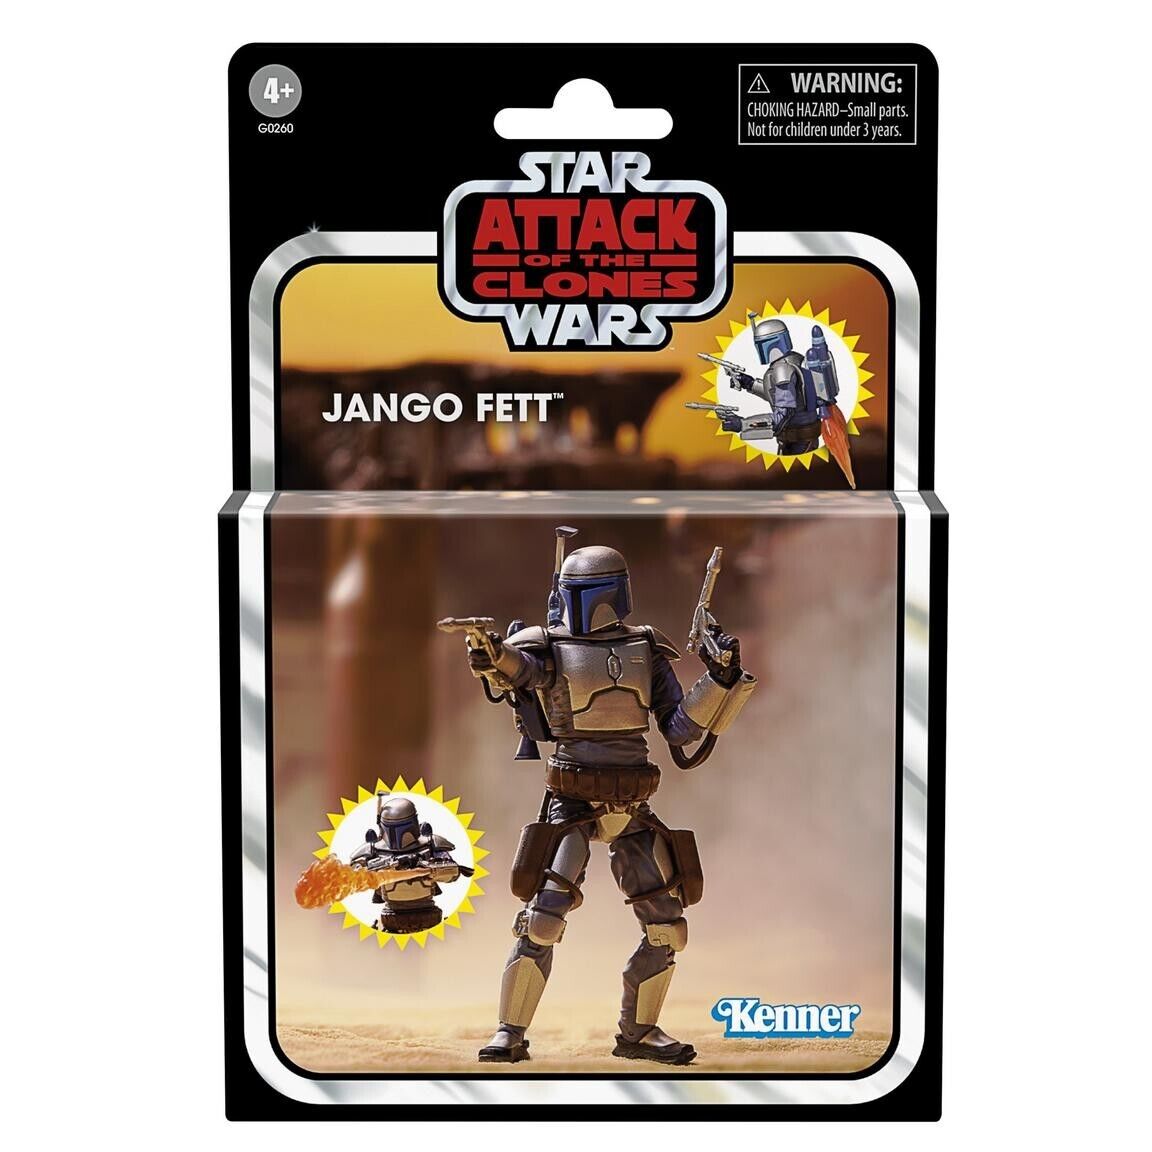 Star Wars Attack of the Clones Vintage Collection Jango Fett Action Figure